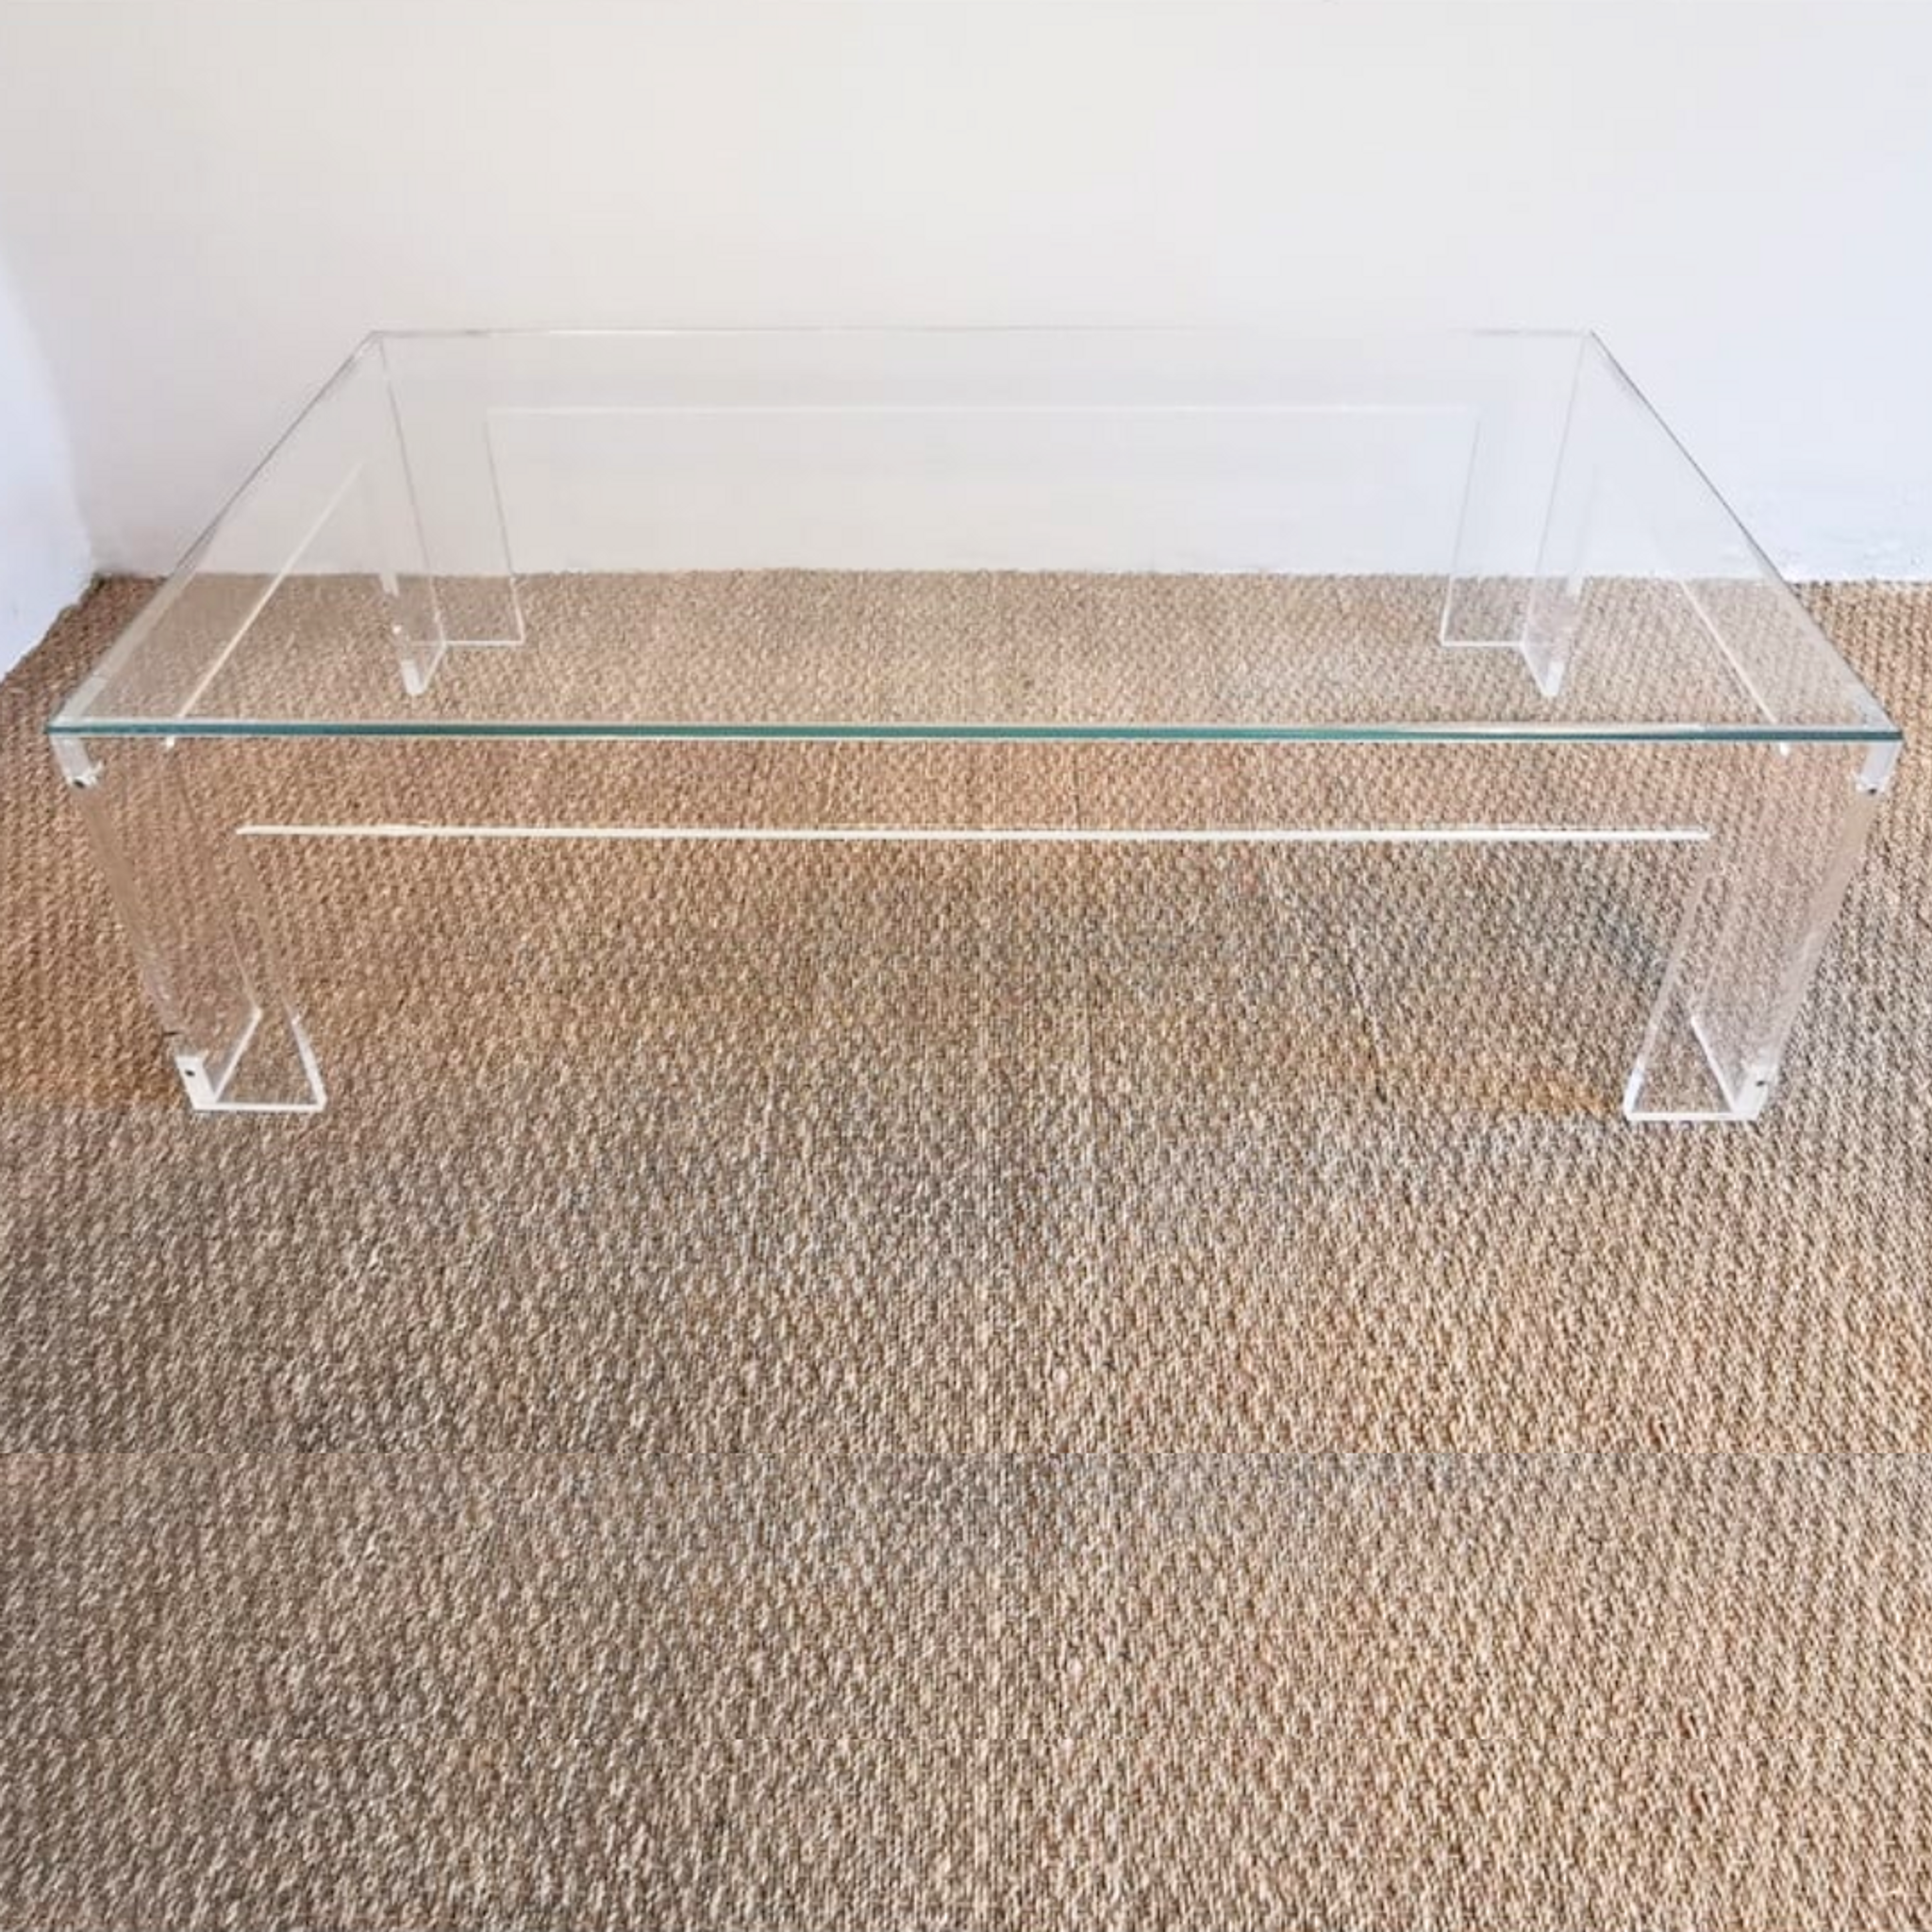 lucite clear acrylic modern parsons table glass top